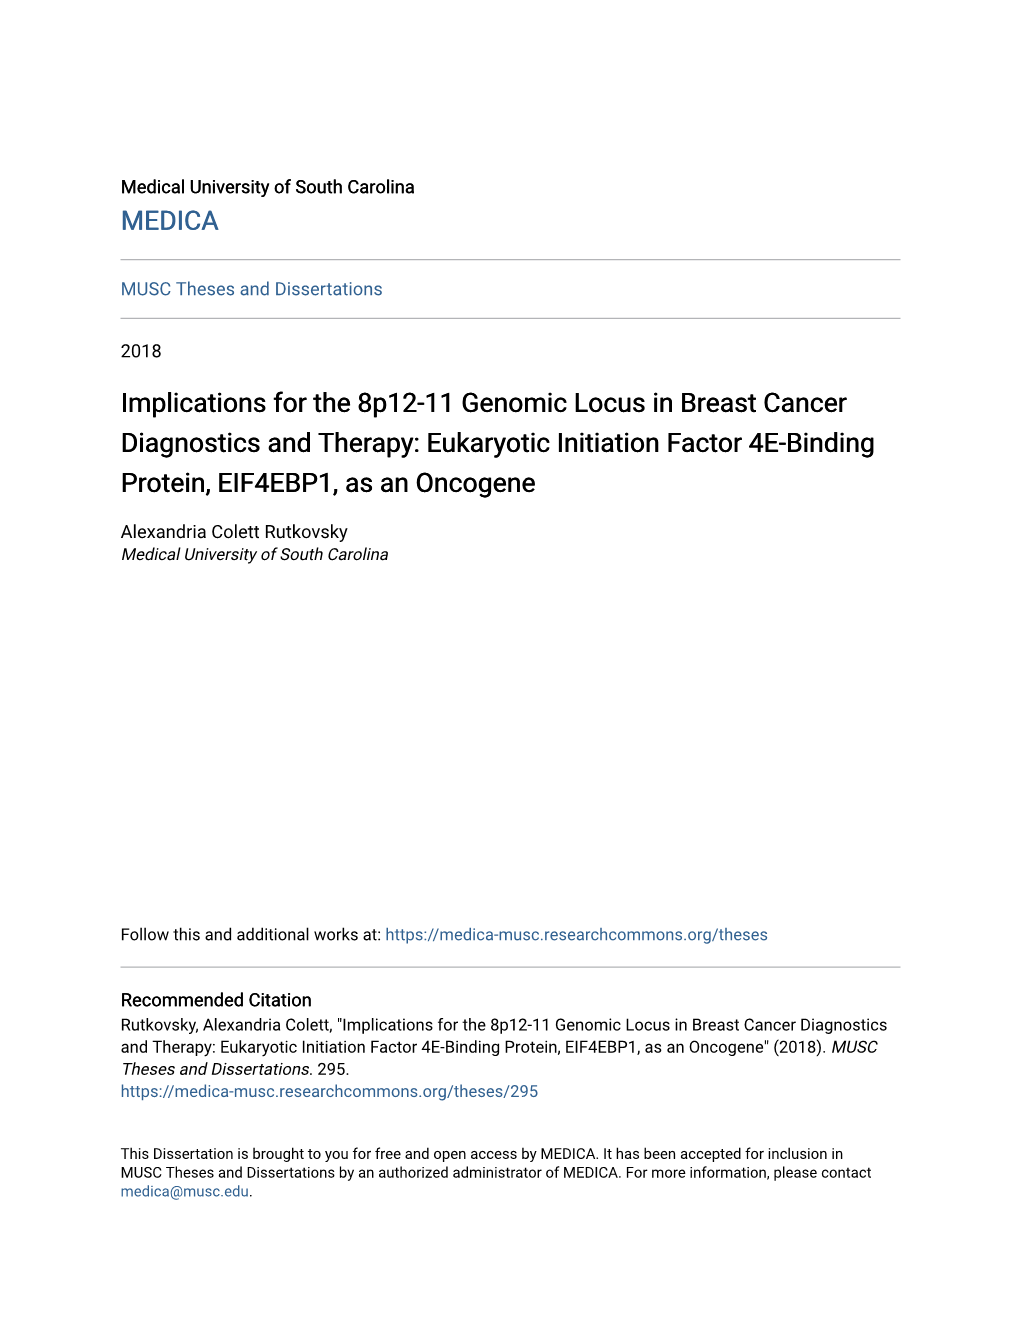 Implications for the 8P12-11 Genomic Locus in Breast Cancer Diagnostics and Therapy: Eukaryotic Initiation Factor 4E-Binding Protein, EIF4EBP1, As an Oncogene